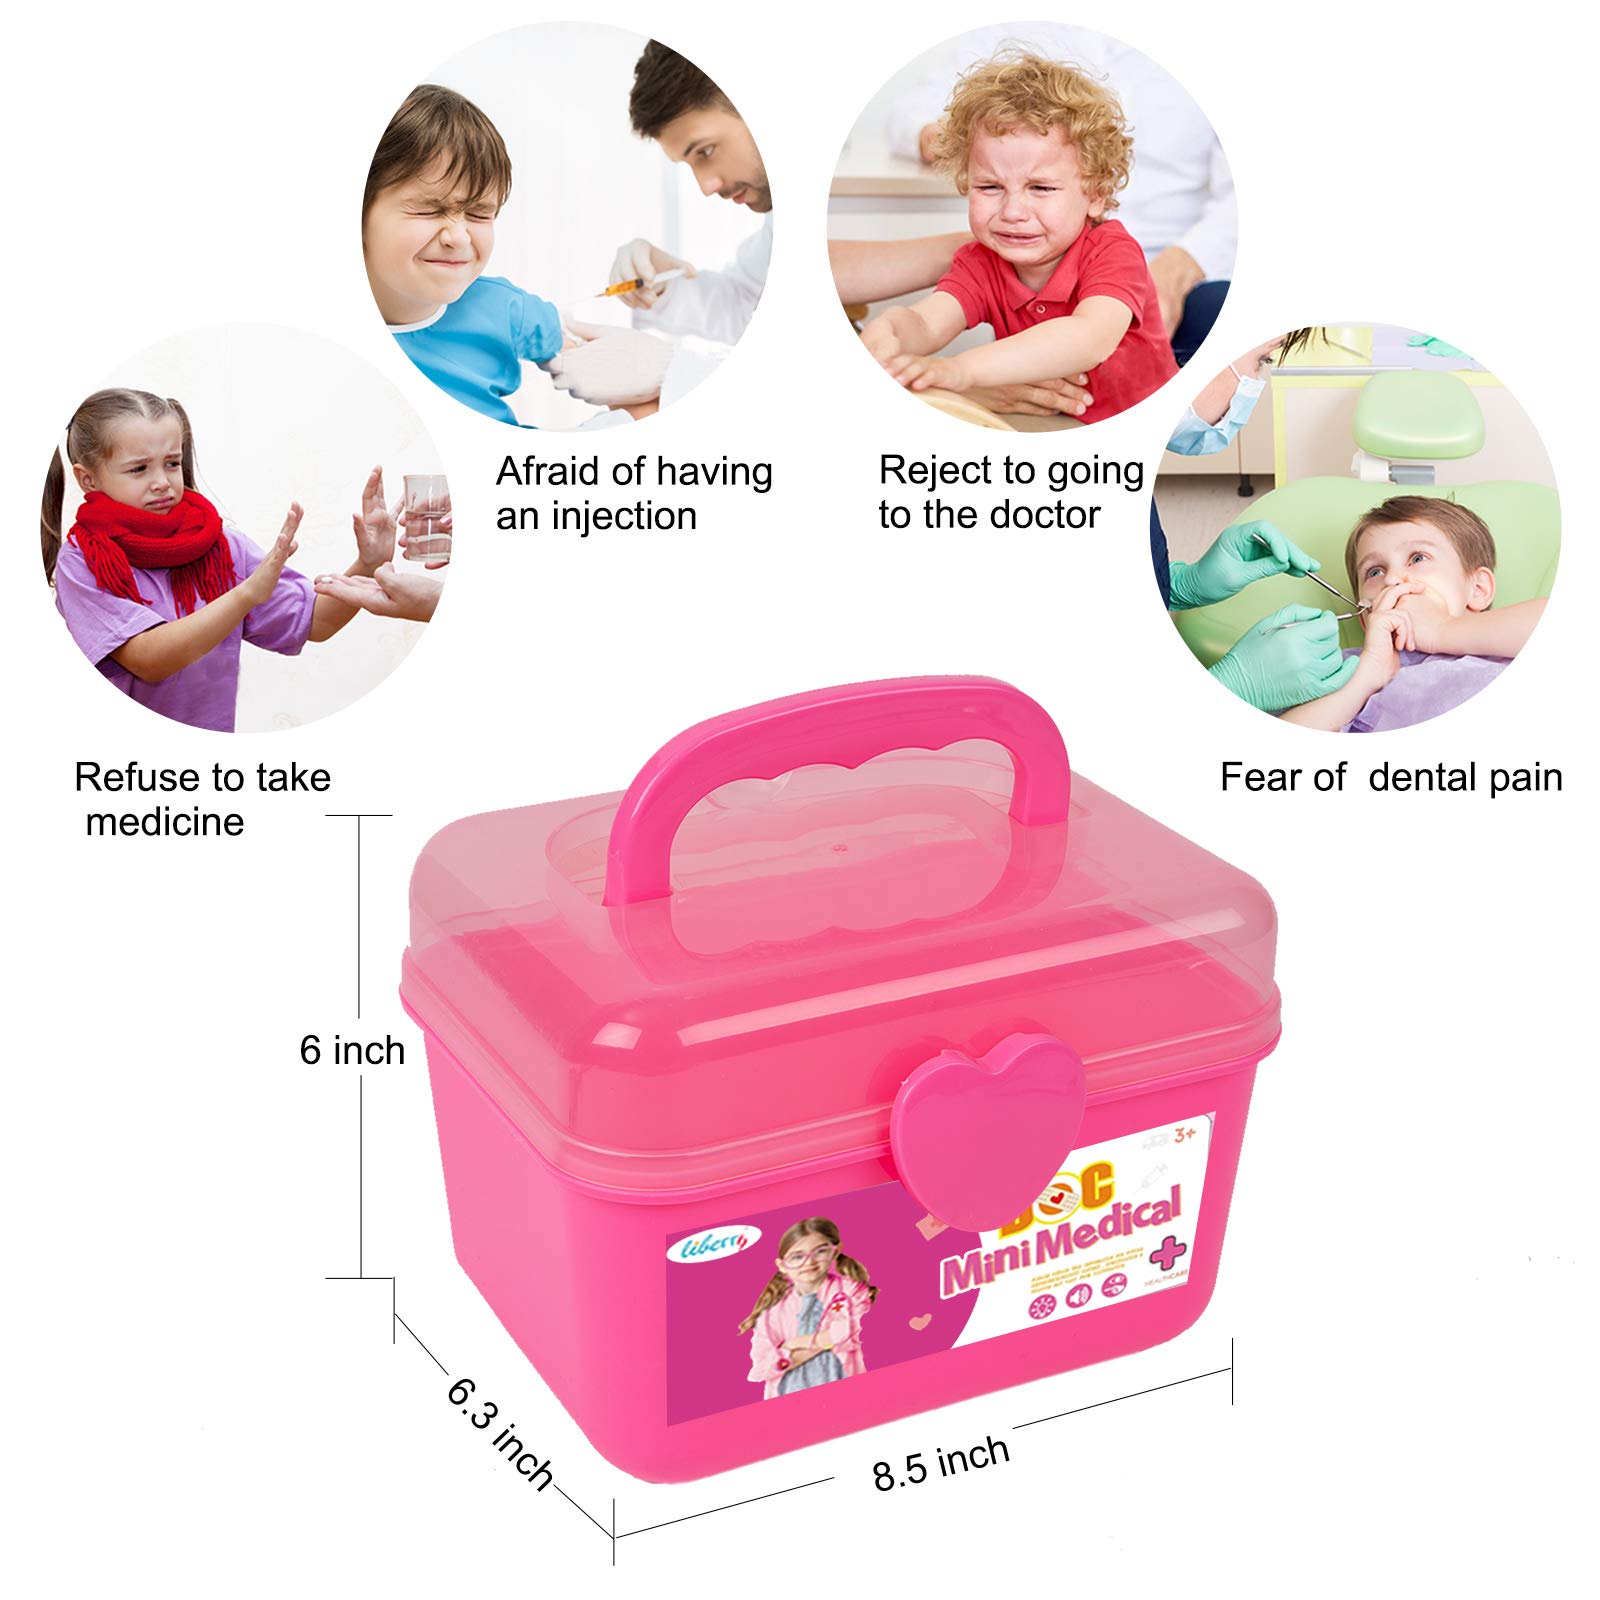 Durable Doctor Kit for Kids, 23 Pieces Pretend Play Educational Doctor Toys, Dentist Medical Kit with Stethoscope Doctor Role Play Costume, Doctor Set Toys for Toddler Girls 3 4 5 6 7 8 Years Old